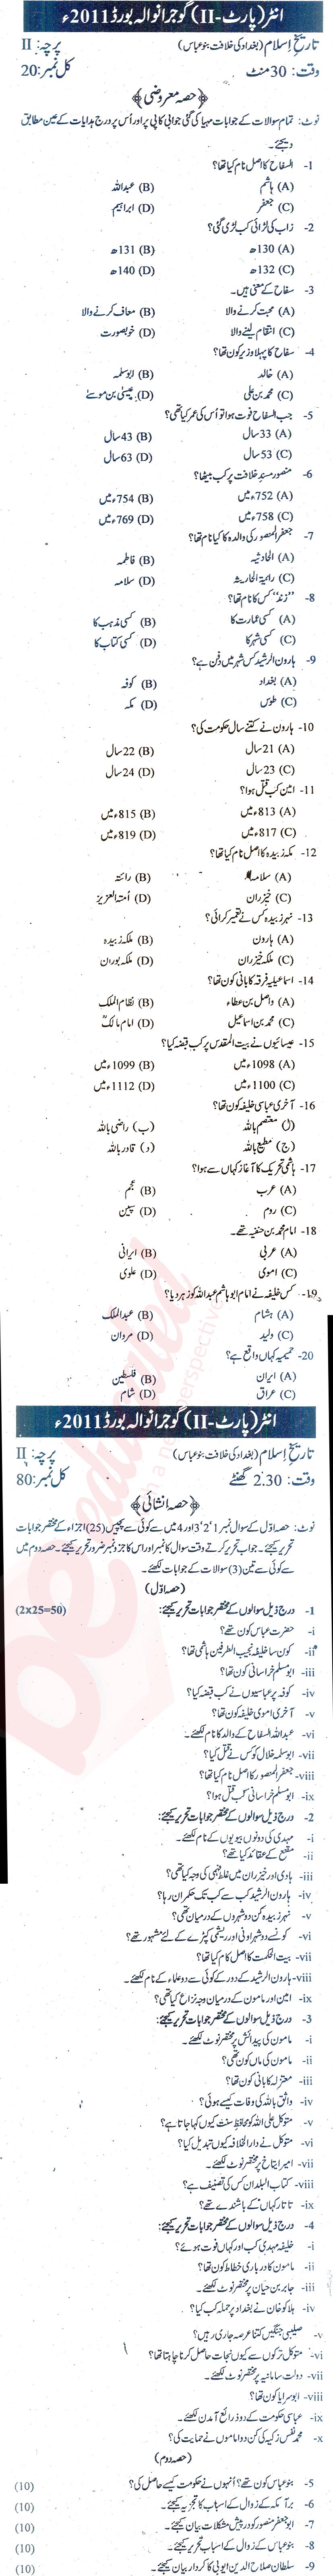 Islamic History FA Part 2 Past Paper Group 2 BISE Gujranwala 2011